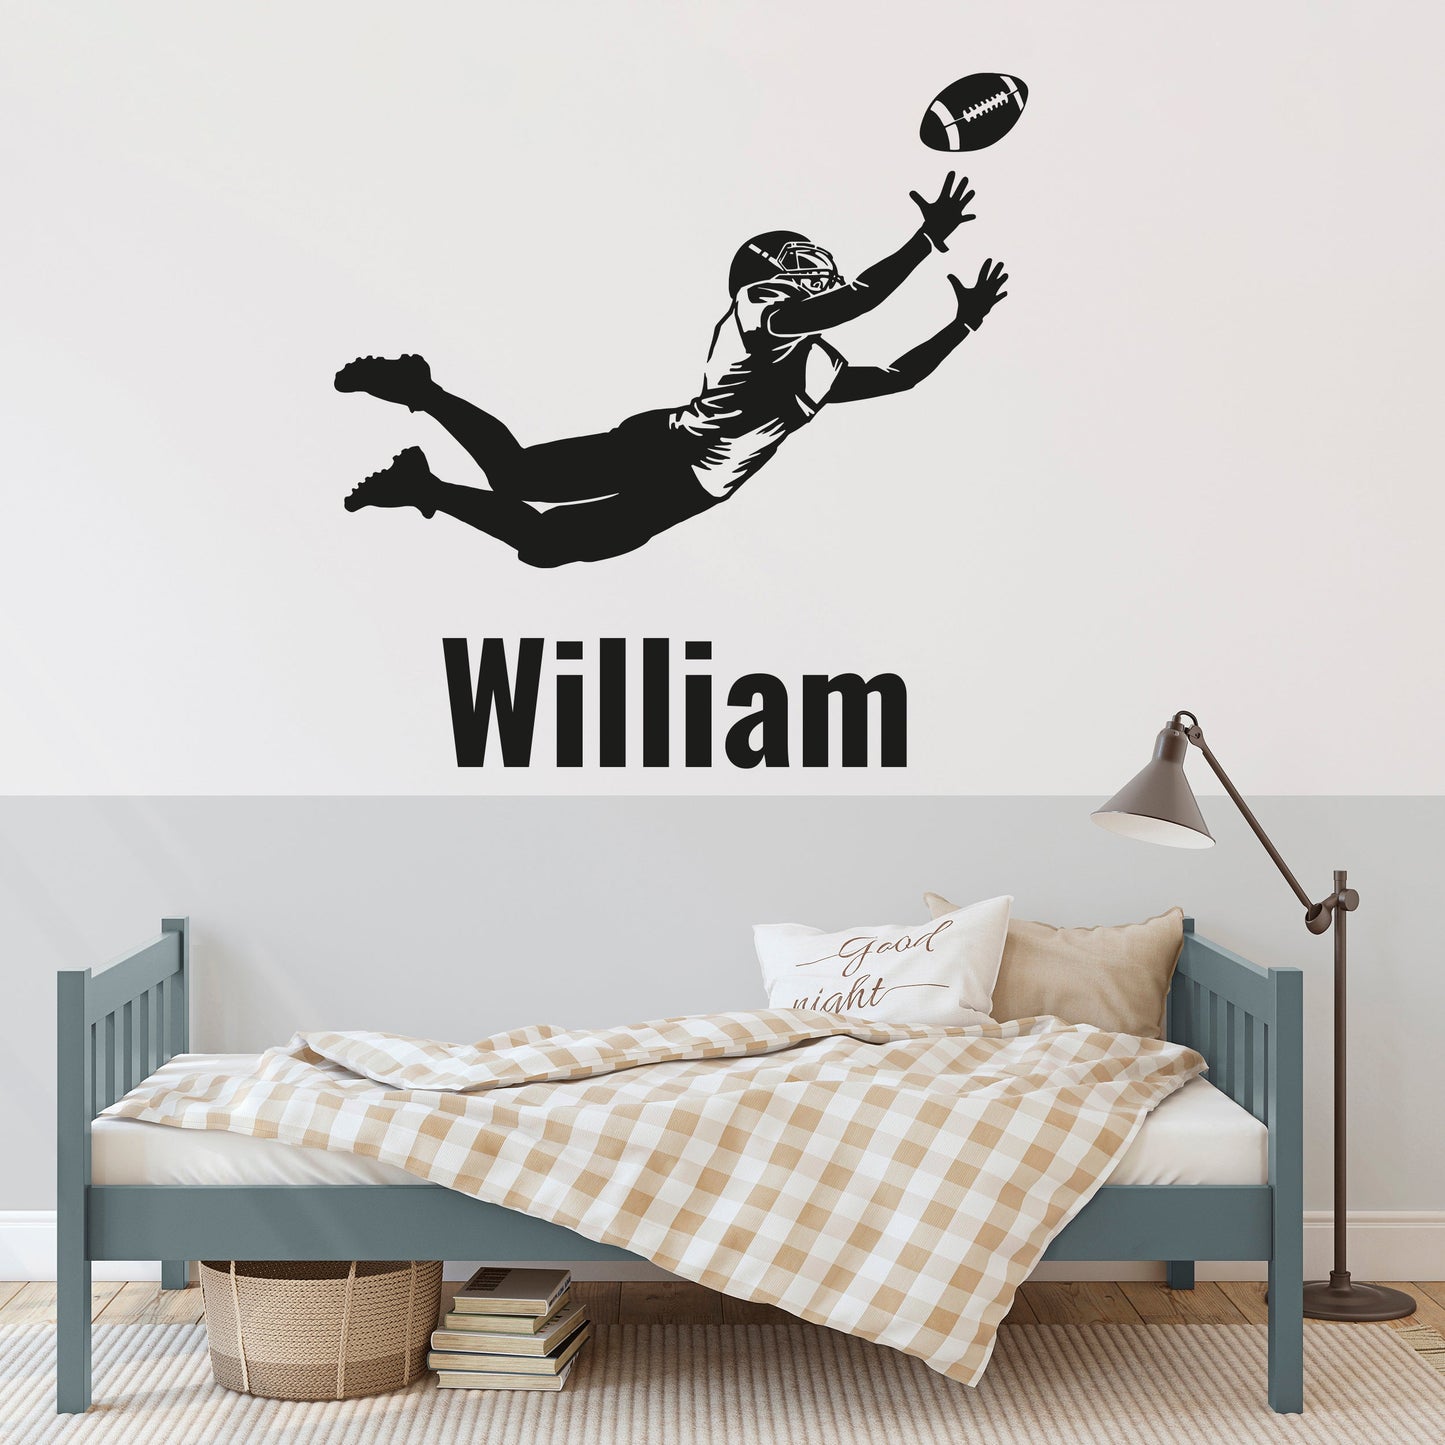 Ball, Personalized Name, and Football Player Room Design